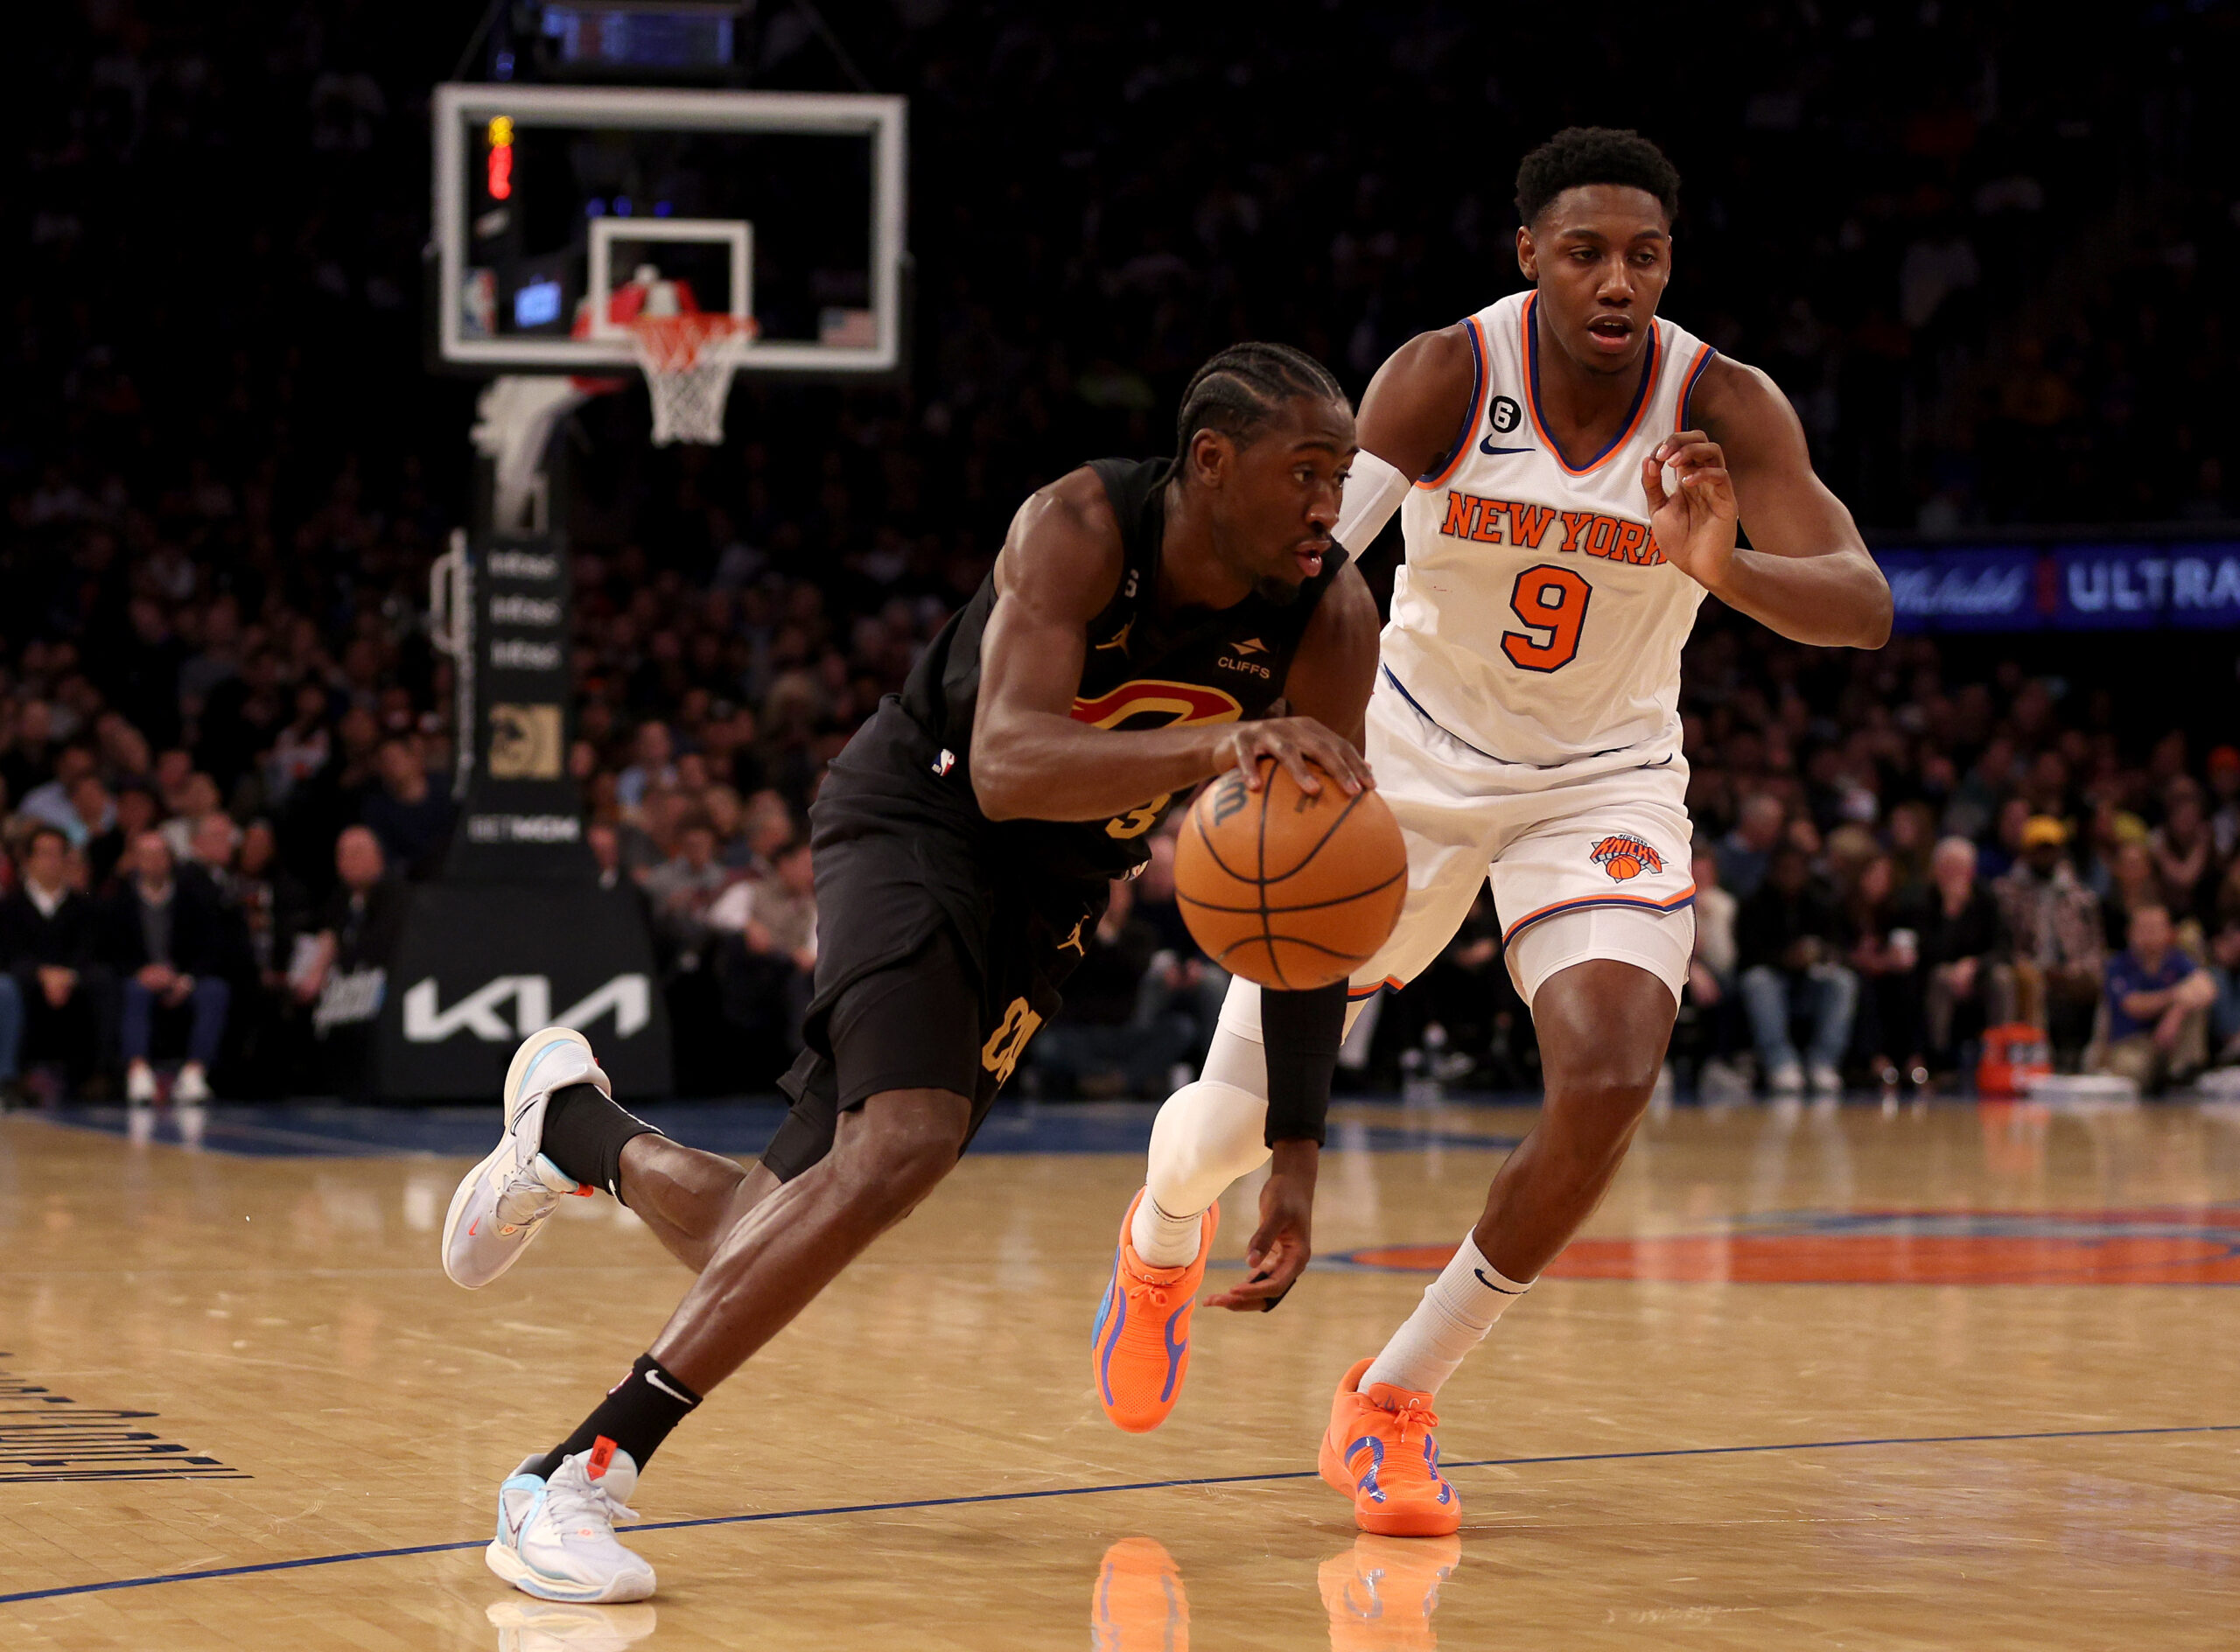 NEW YORK, NEW YORK - JANUARY 24:  Caris LeVert #3 of the Cleveland Cavaliers heads for the net as RJ Barrett #9 of the New York Knicks defends in the second quarter at Madison Square Garden on January 24, 2023 in New York City. NOTE TO USER: User expressly acknowledges and agrees that, by downloading and or using this photograph, User is consenting to the terms and conditions of the Getty Images License Agreement. (Photo by Elsa/Getty Images)